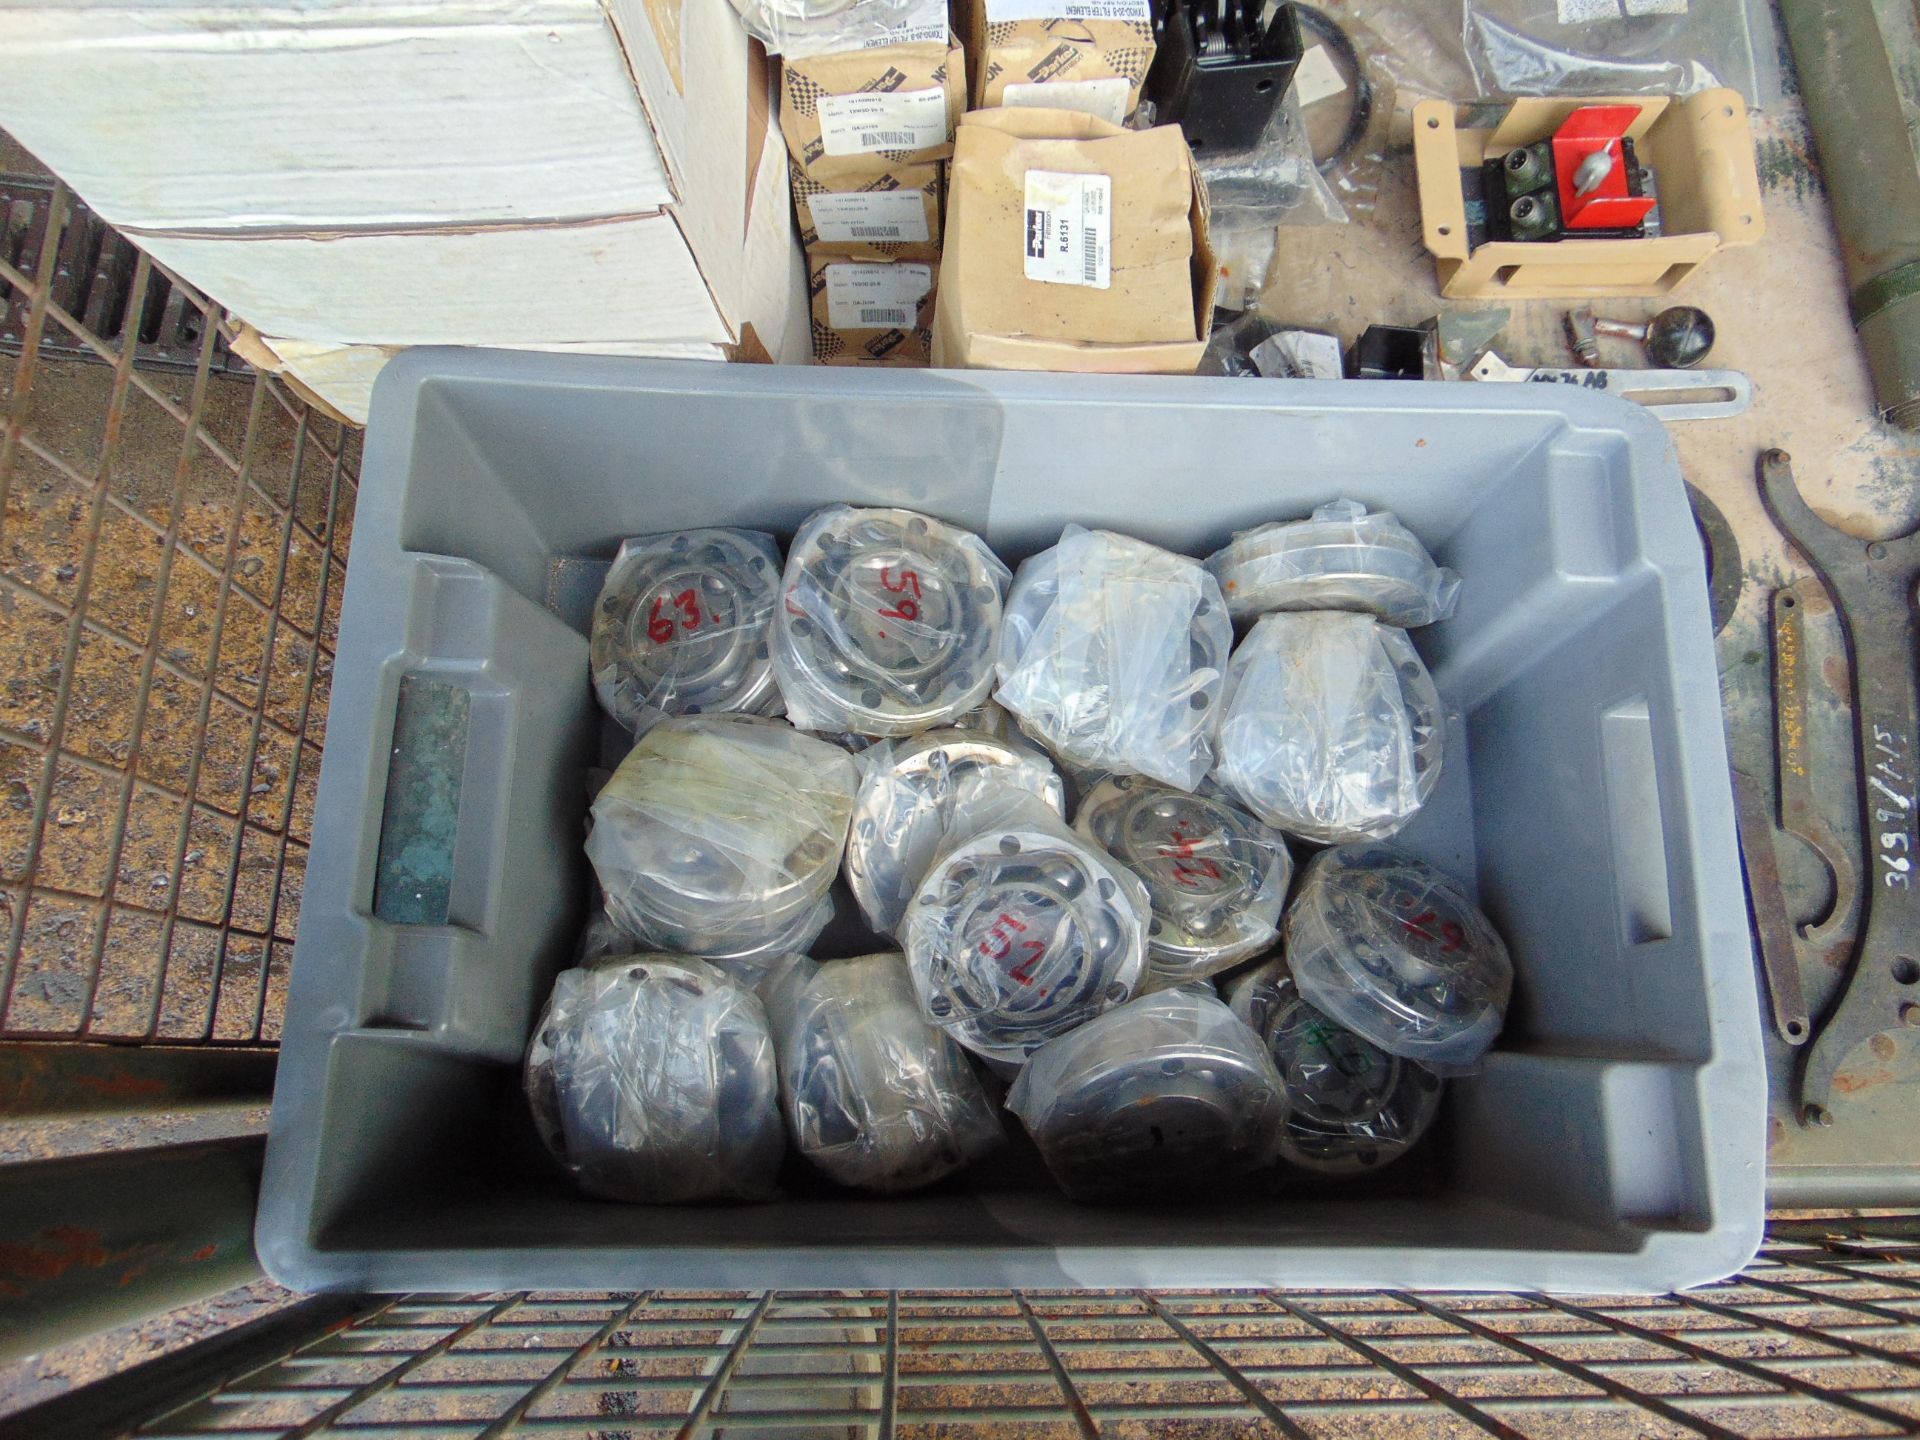 1 x Stillage of Tools, Bearings, Mirrors Filters etc - Image 4 of 8